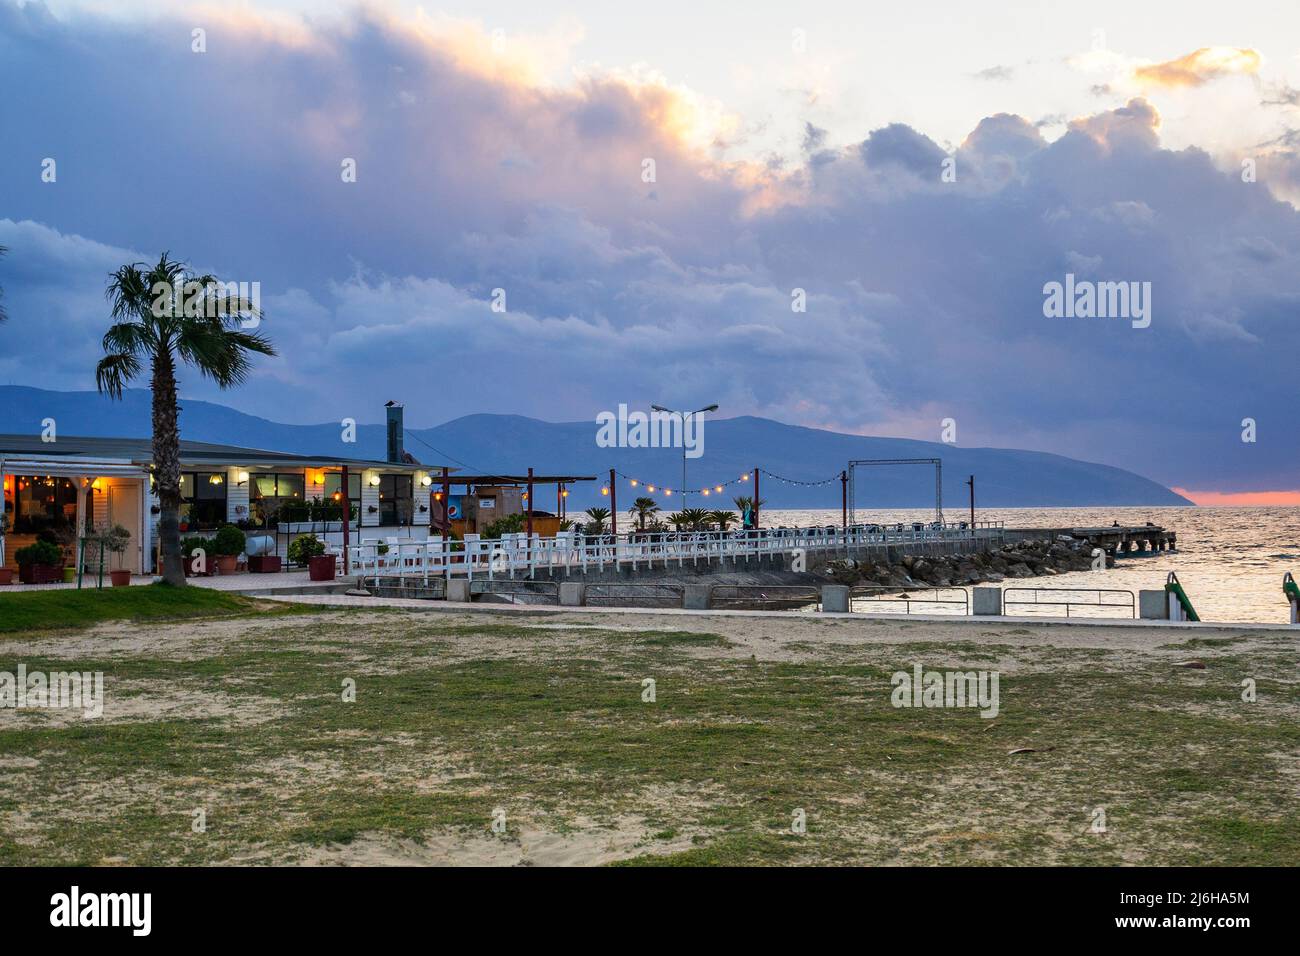 cafe by the sea. restaurant on the beach at sunset Stock Photo